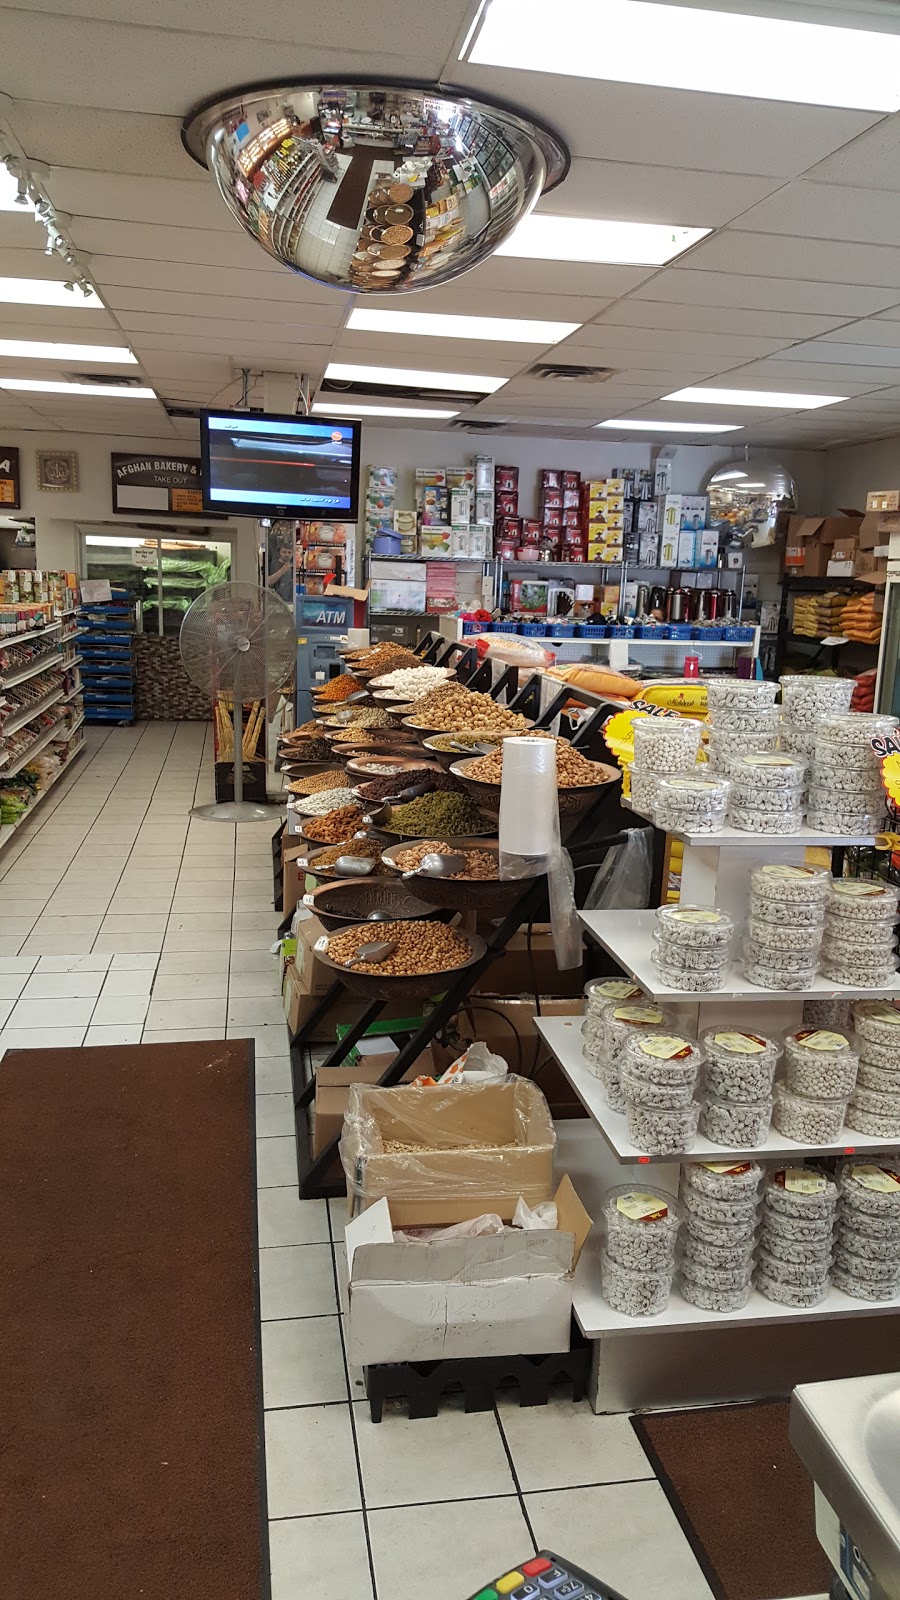 Afghan Supermarket | store | 549 Markham Rd, Scarborough, ON M1H 2A3, Canada | 4164382861 OR +1 416-438-2861